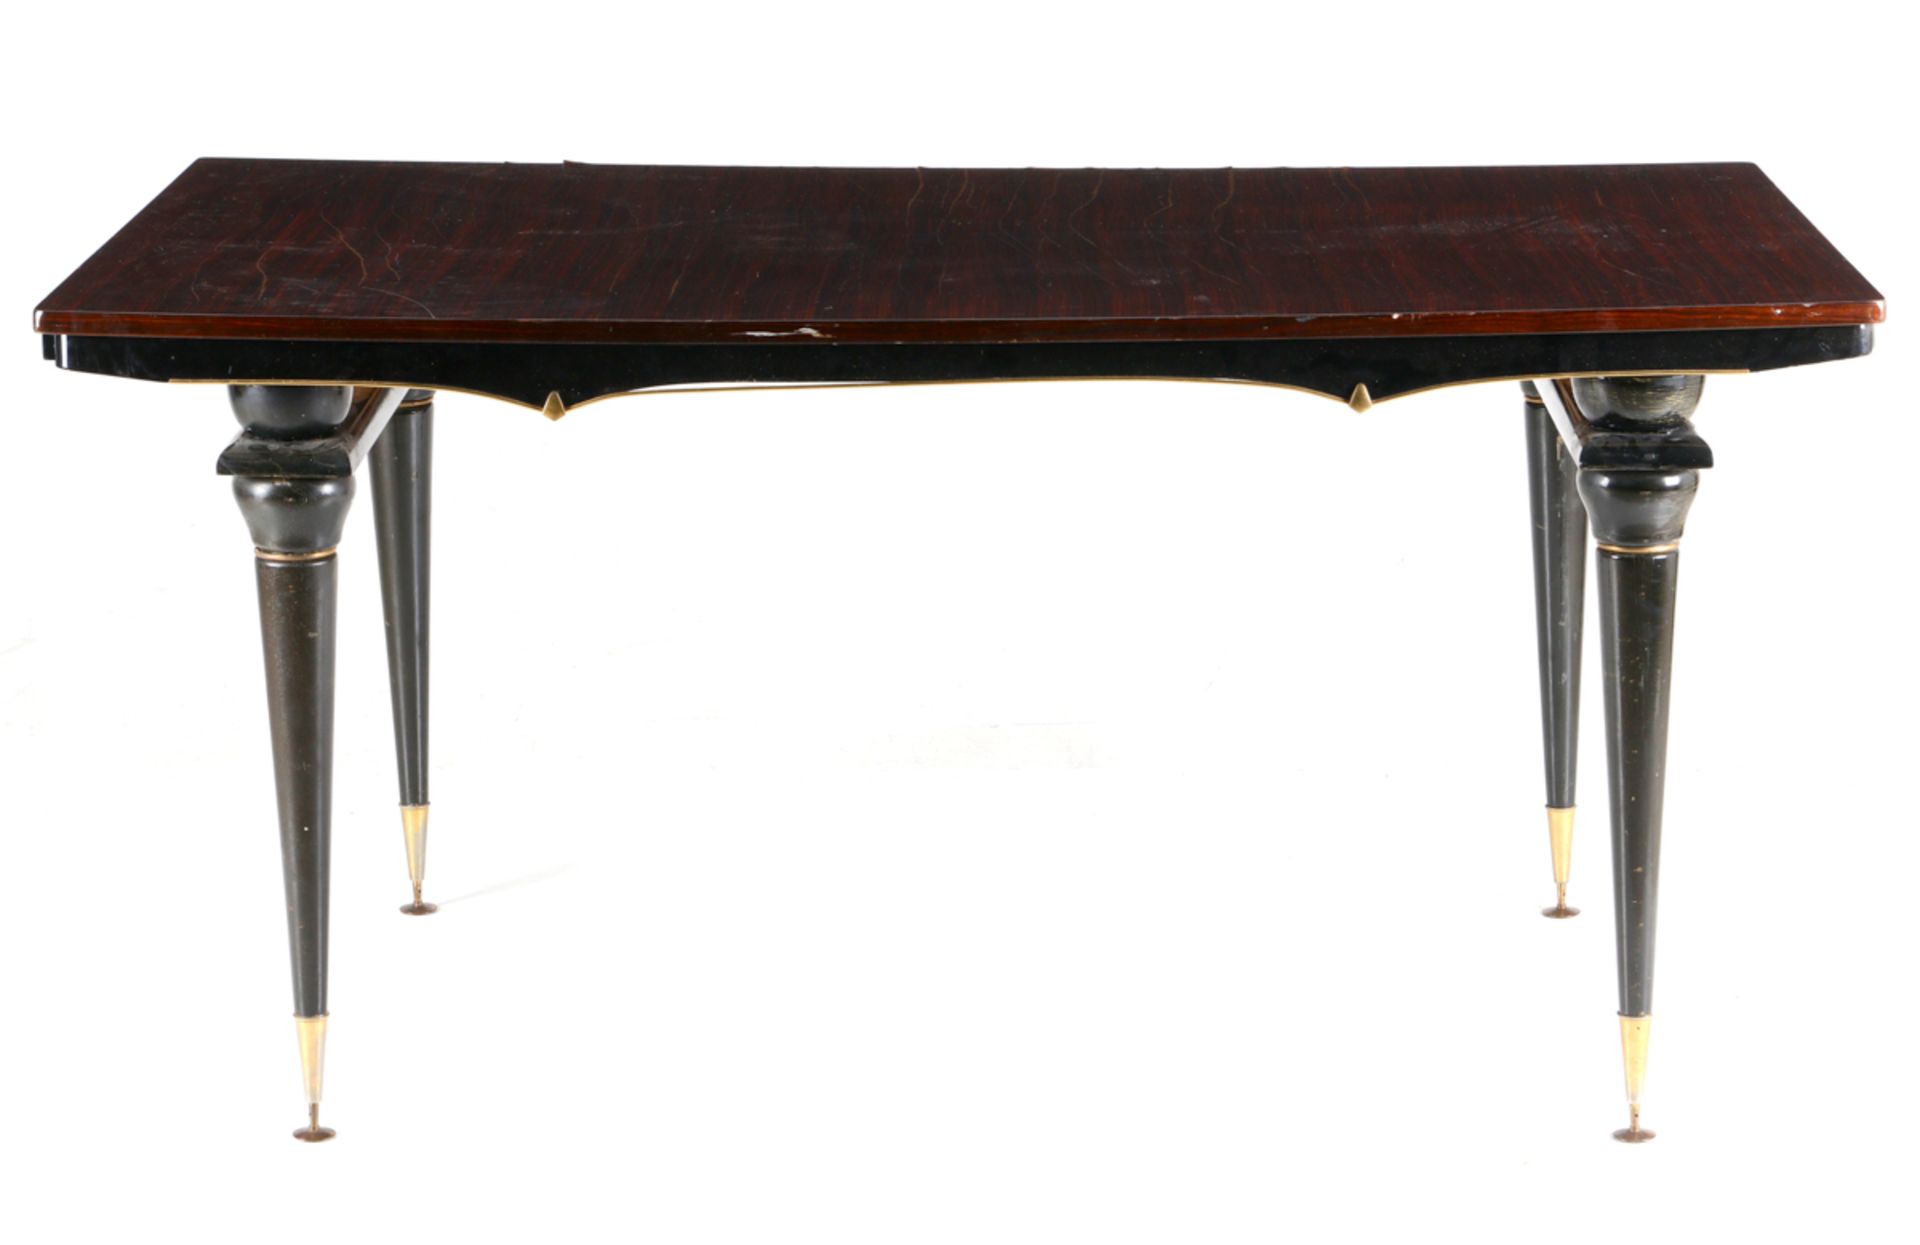 A FRENCH ART DÉCO TABLE Zebra-wood top and ebonized wood structure, feet with metal appliques.